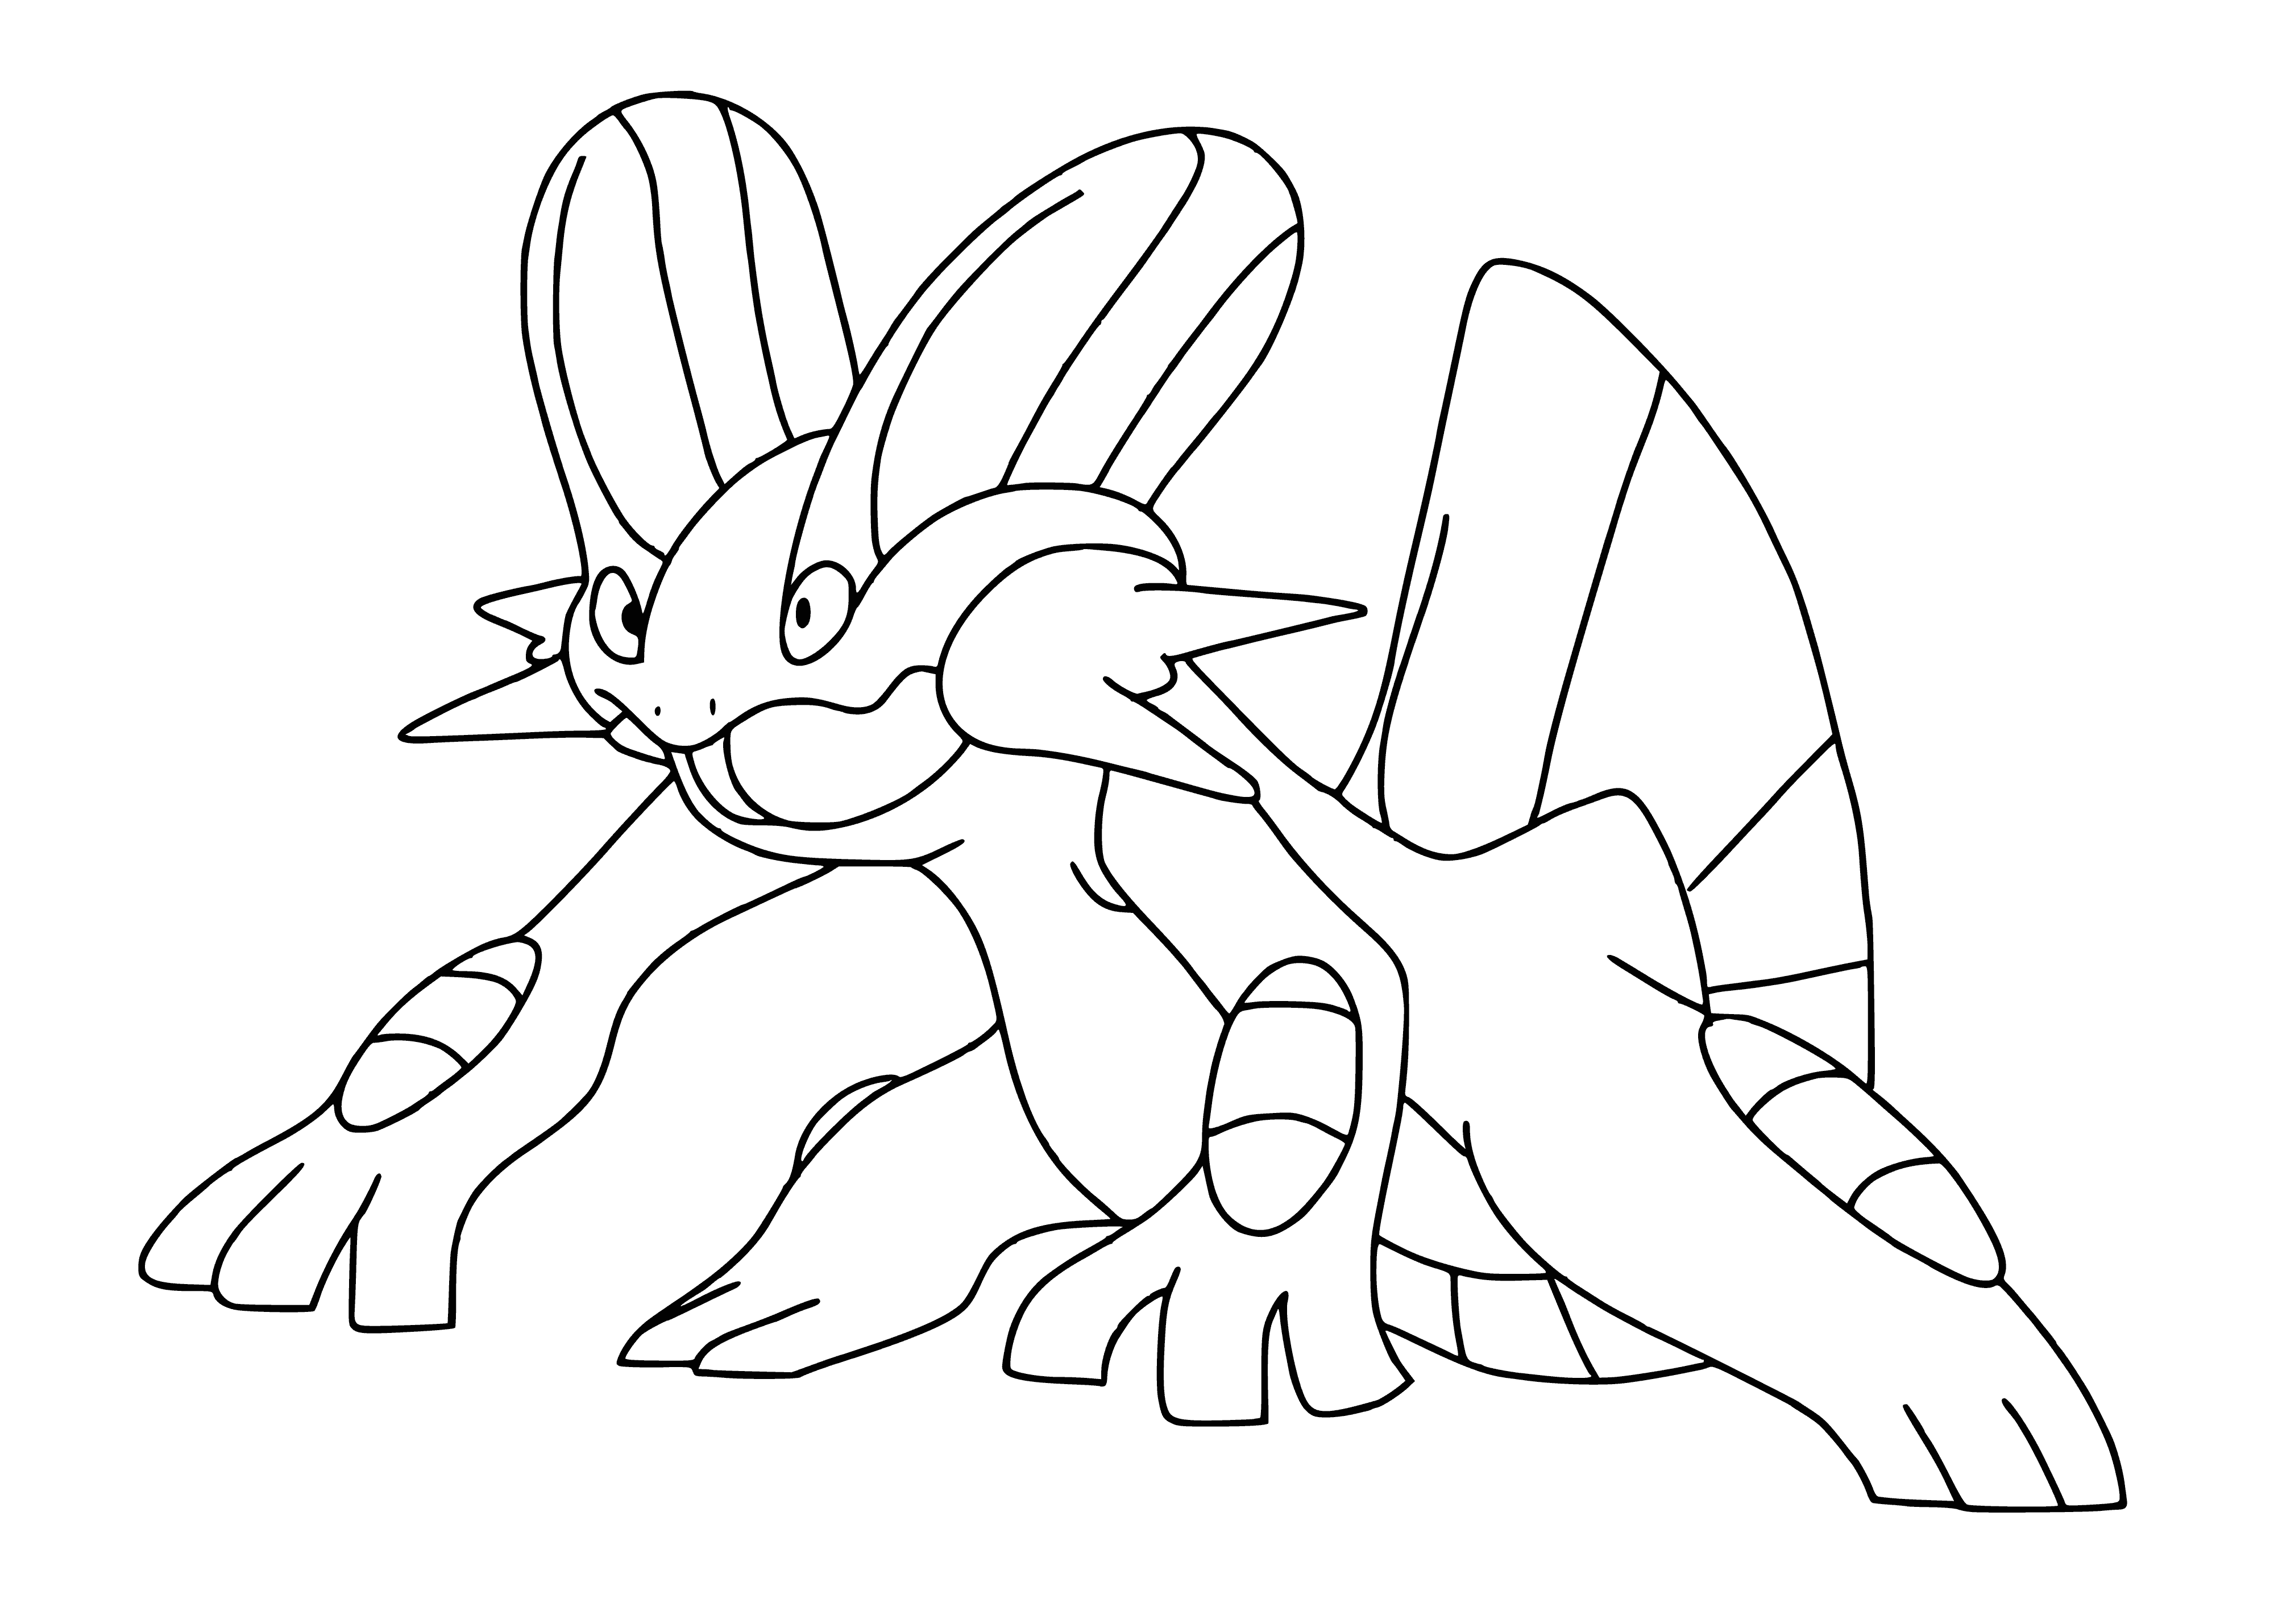 coloring page: Large, blue four-legged Pokemon w/long tail, fins, red jewel on forehead, small black eyes.